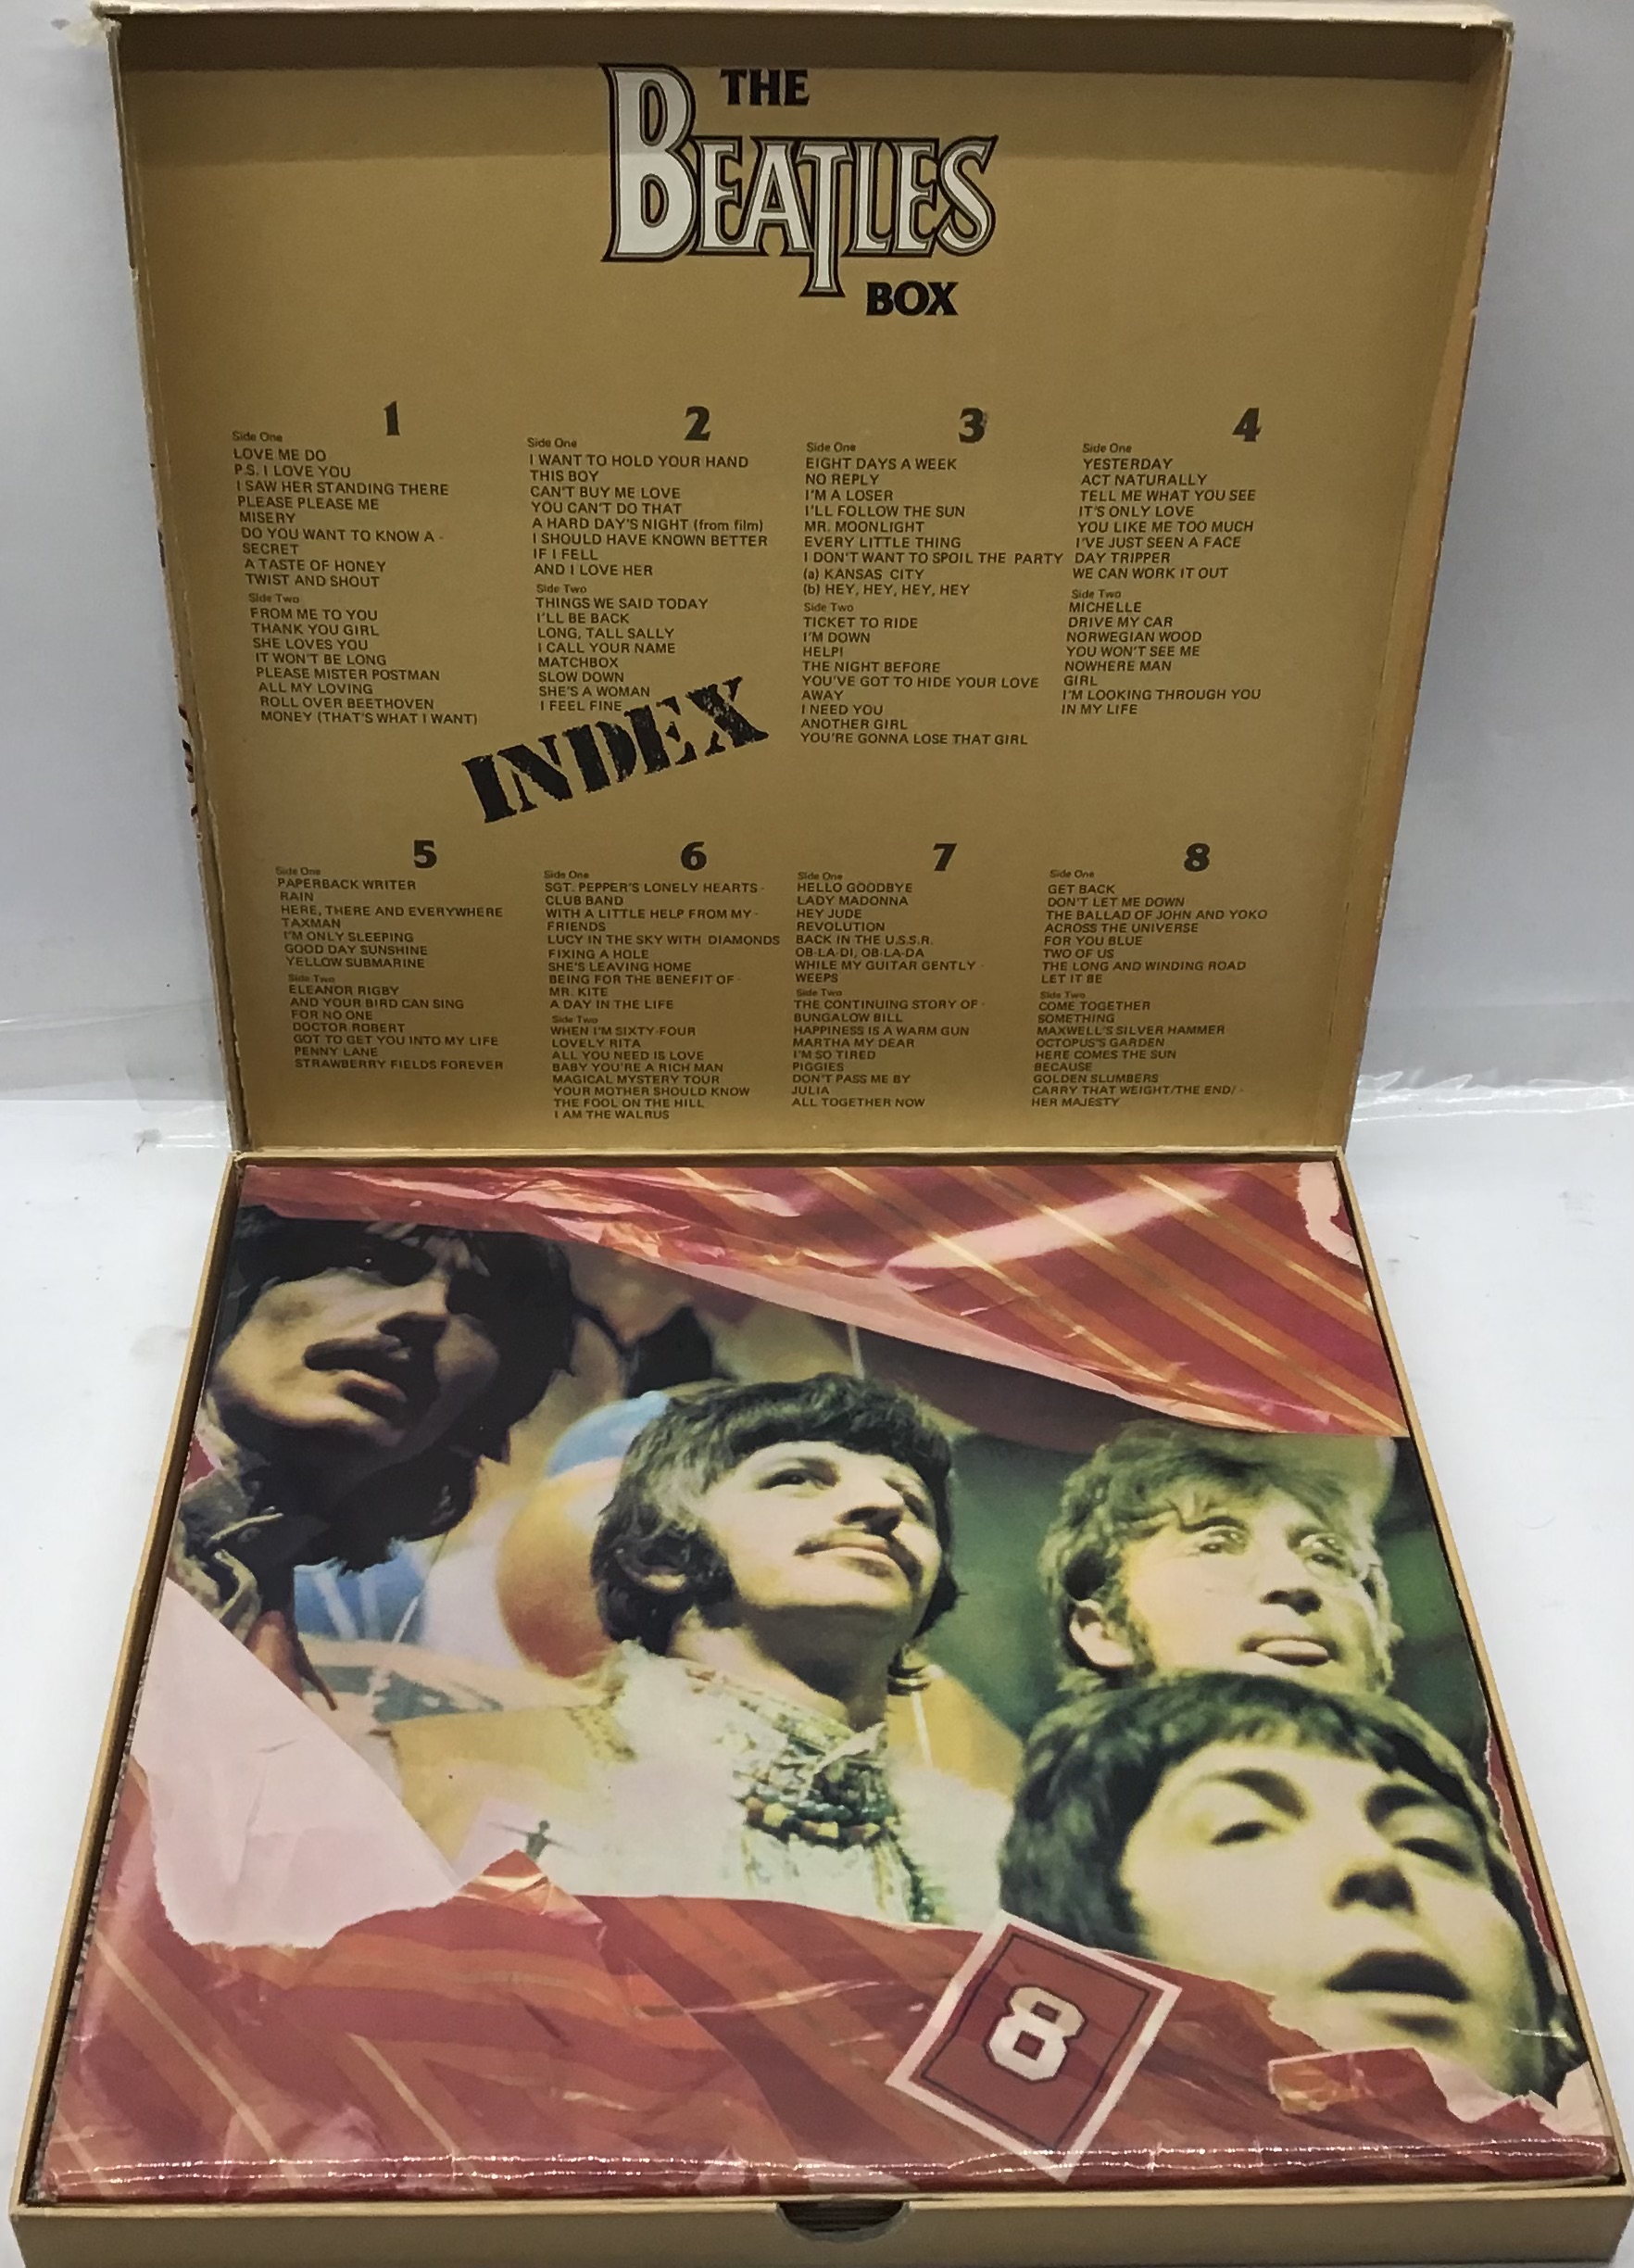 BEATLES FROM LIVERPOOL-THE BEATLES BOX SET OF VINYL LP’S. - Image 3 of 4